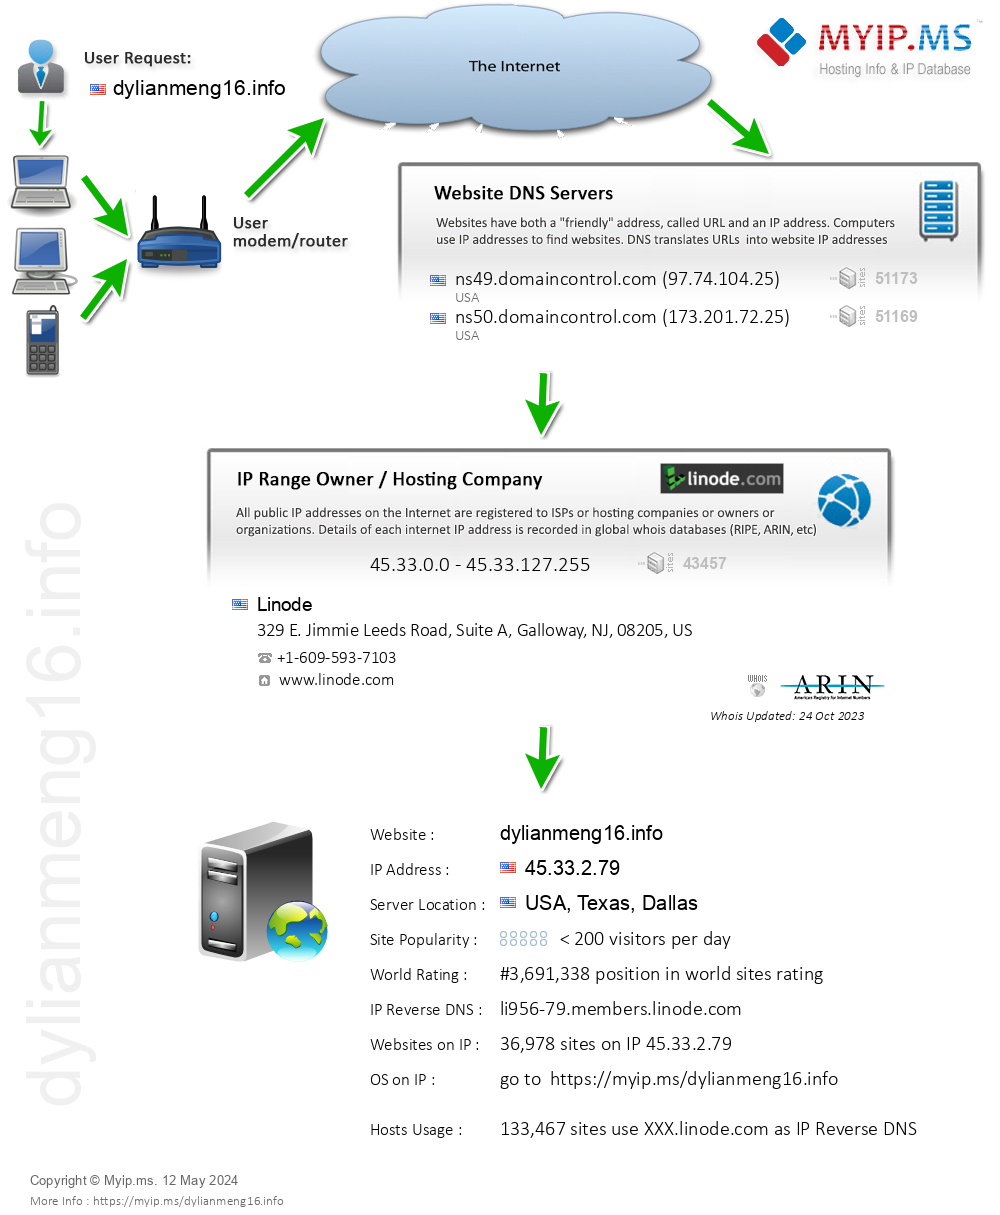 Dylianmeng16.info - Website Hosting Visual IP Diagram